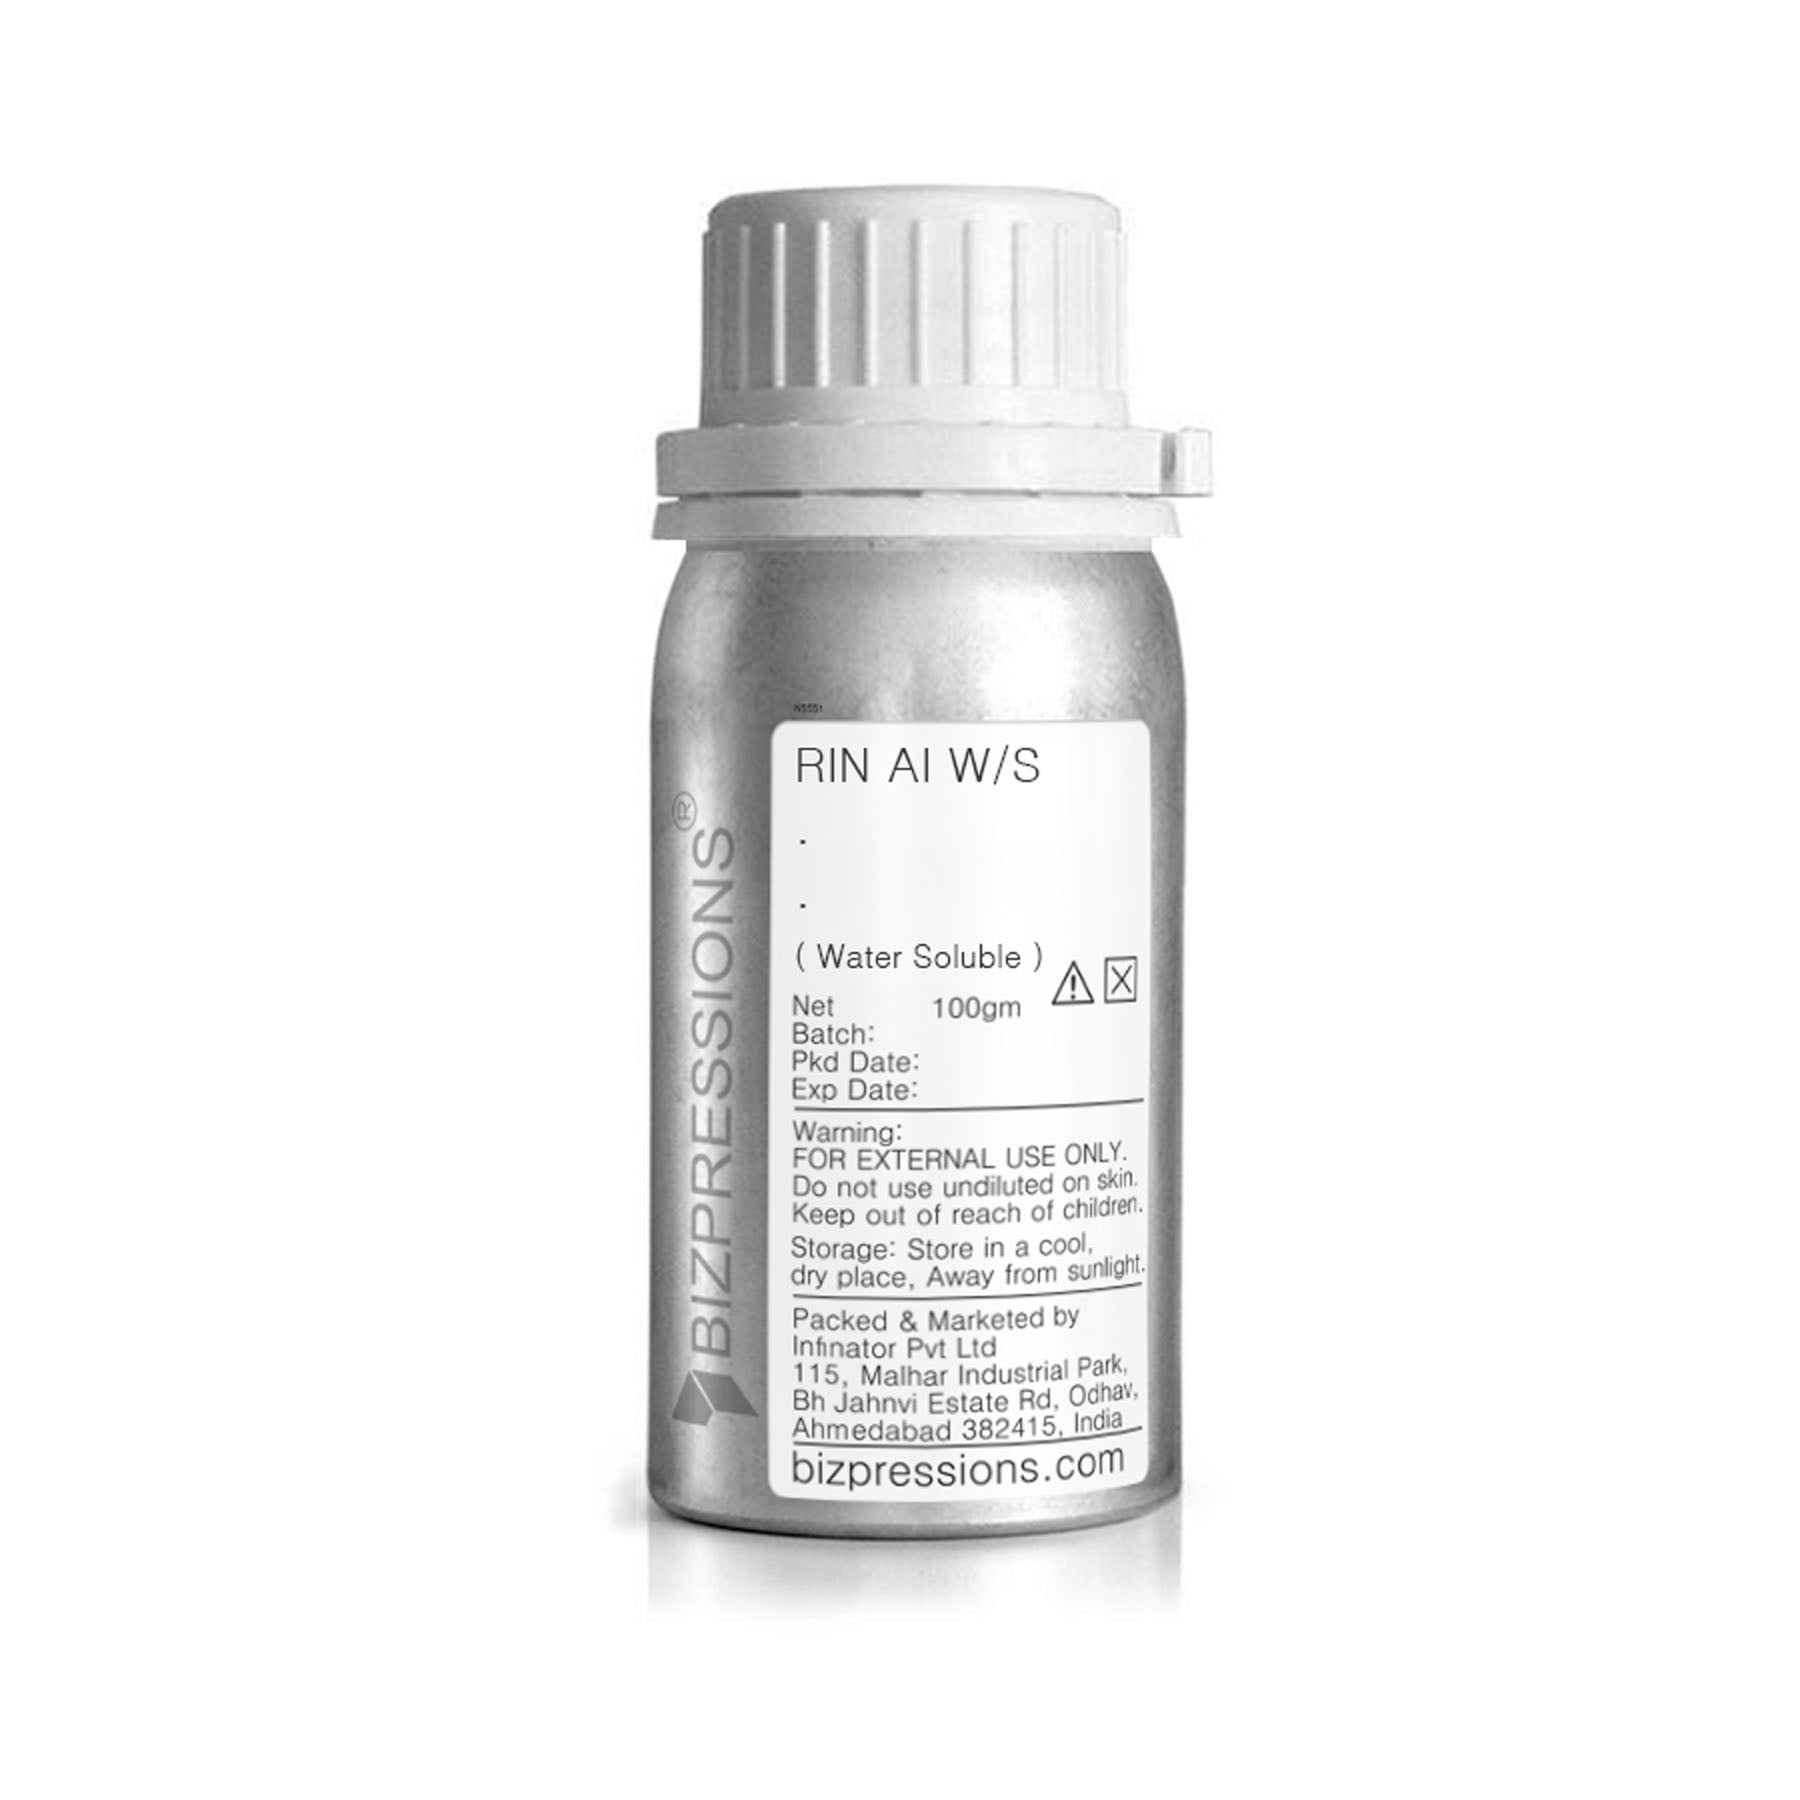 RIN AI W/S - Fragrance ( Water Soluble ) - 100 gm